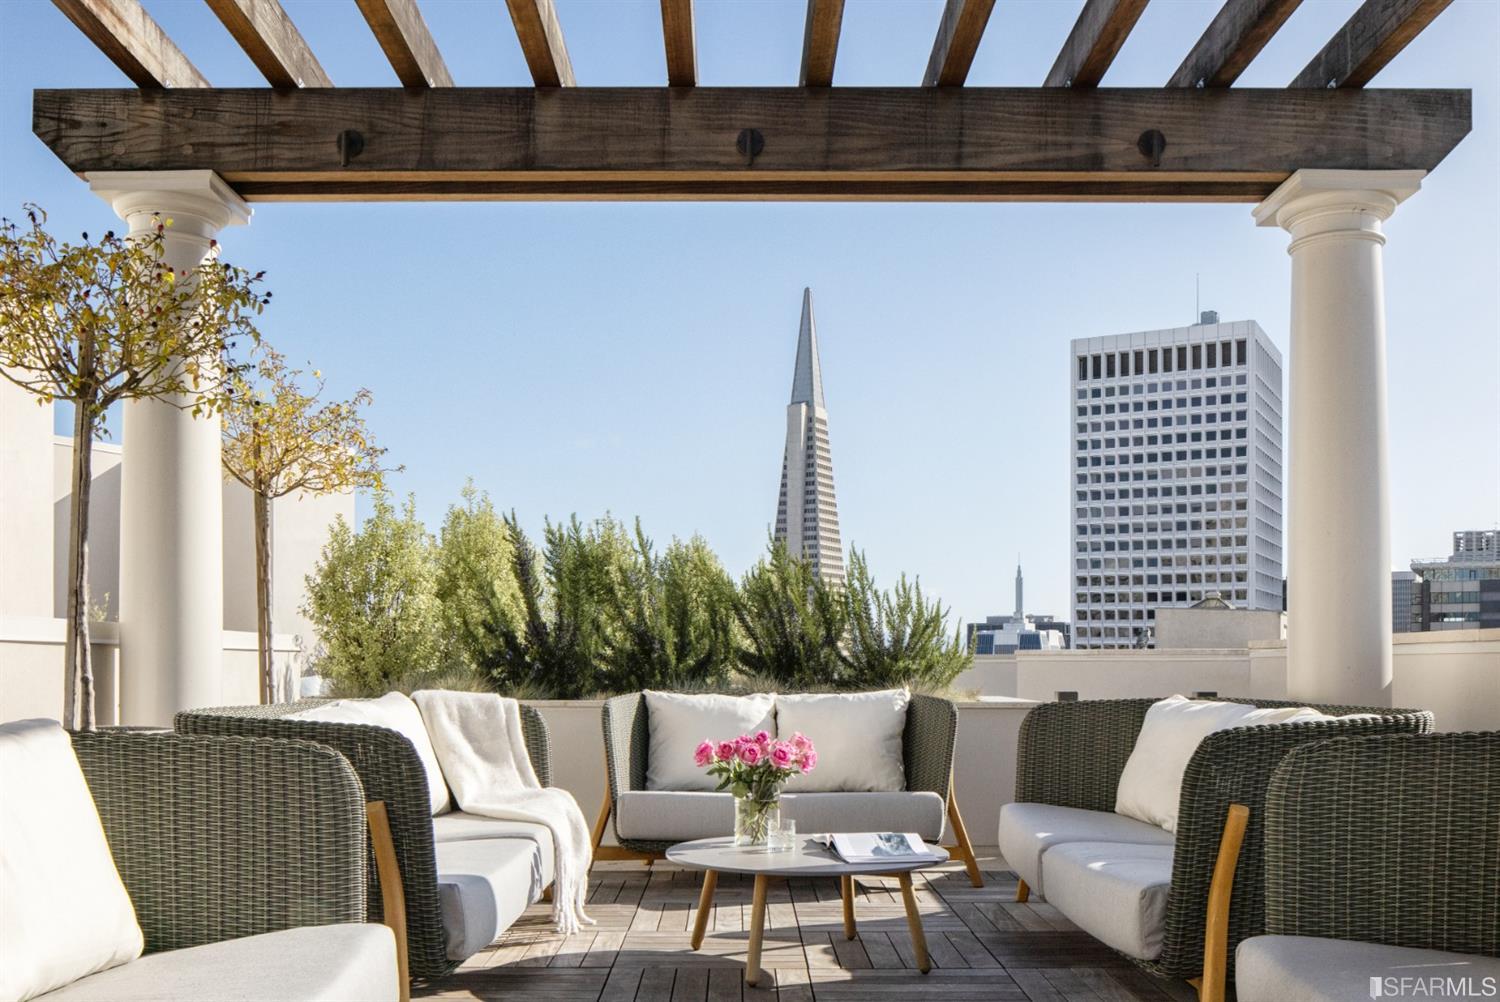 Celebrating its Nob Hill locale, The Sky Line is a roof terrace designed for al fresco entertaining with an outdoor kitchen that includes a gas grill, a double-sided fireplace, and a dining area.